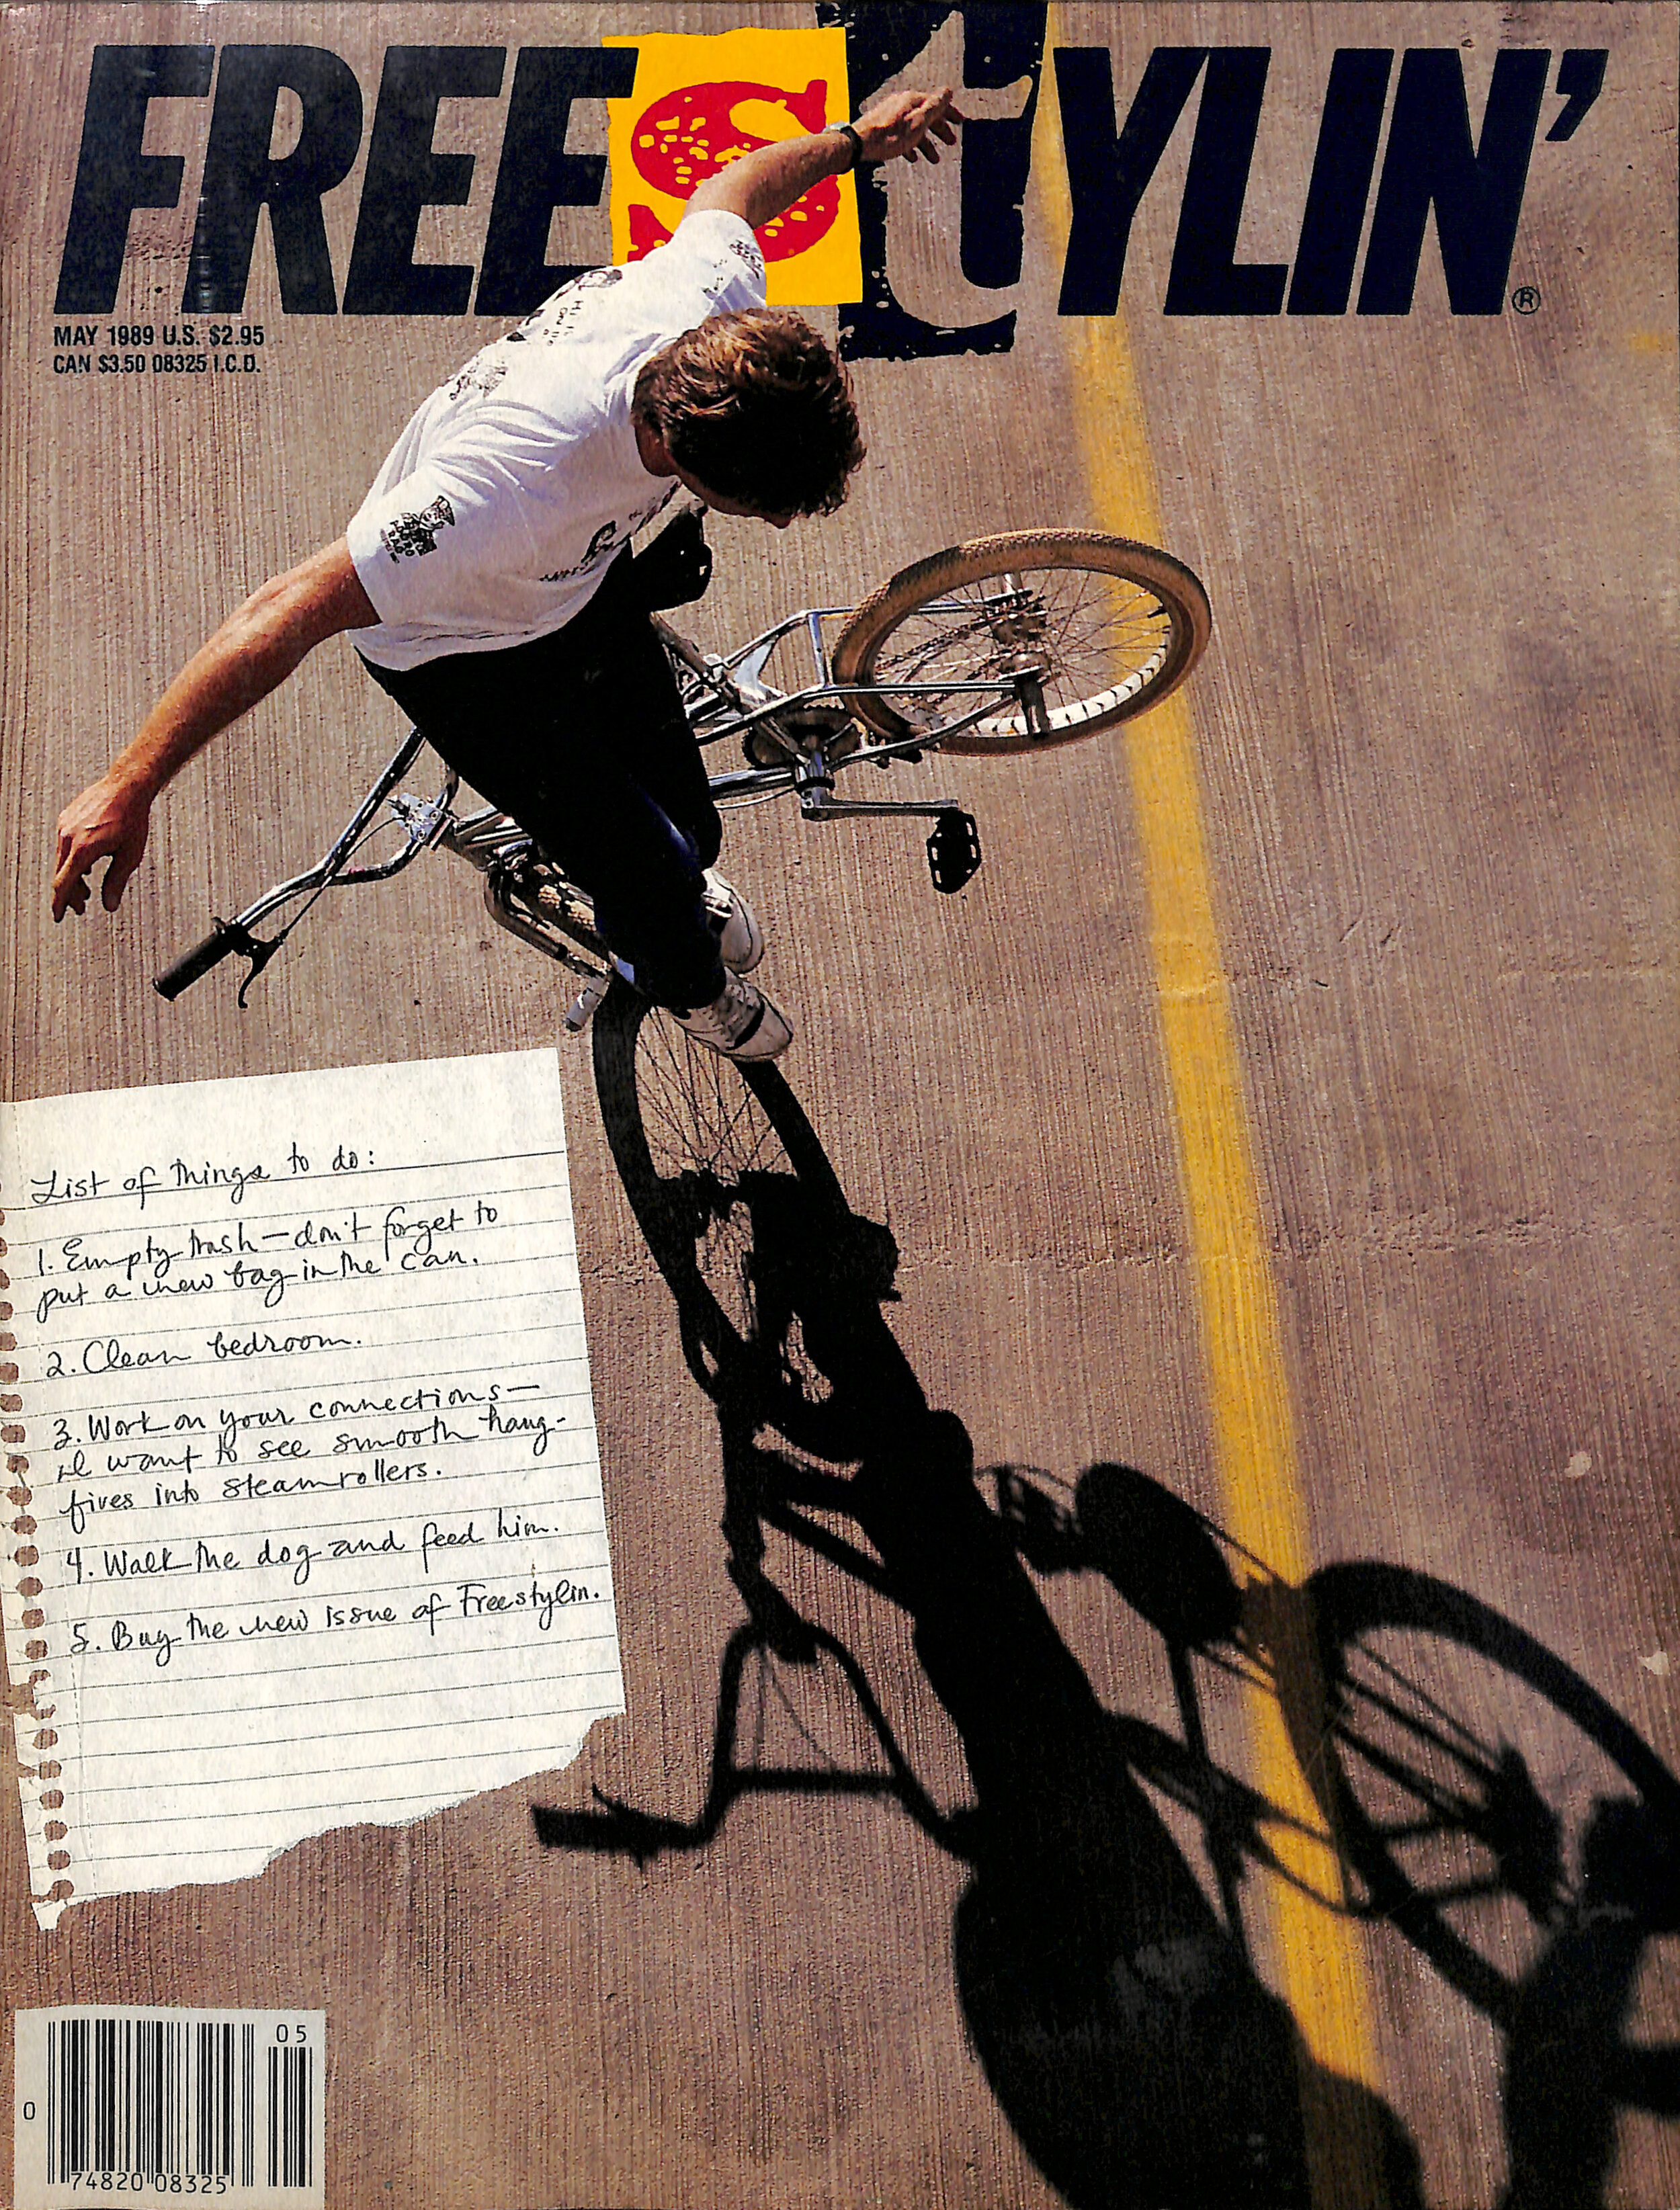 05_1989_May_Freestylin_Cover.jpg